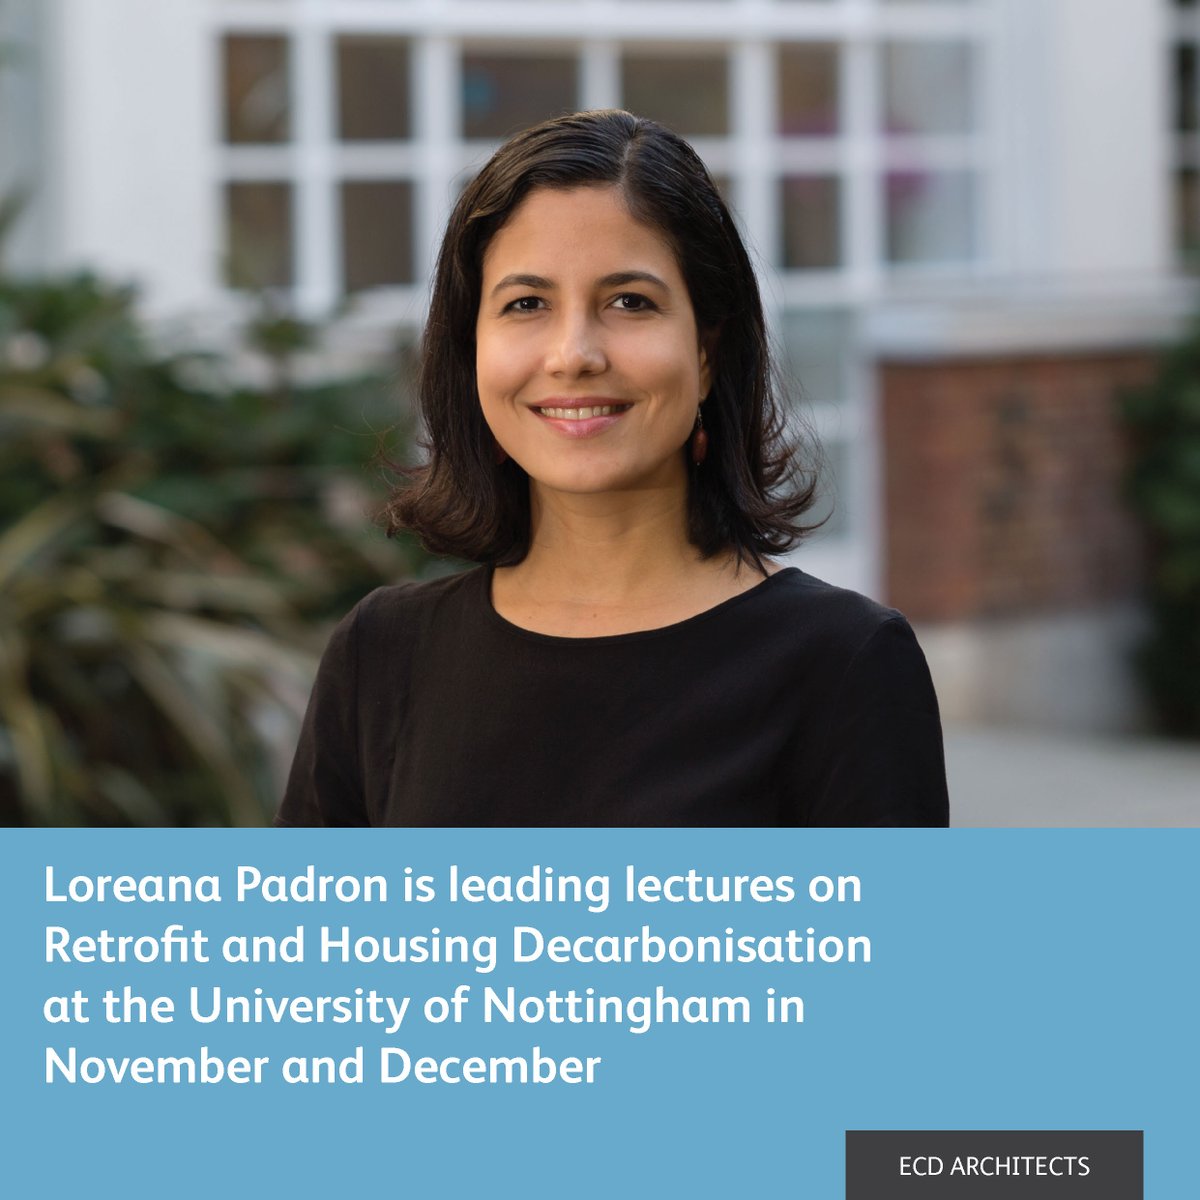 Our Head of Sustainability, @loreanap, is delivering lectures at the @UniofNottingham over November and in December! She will talk to the students on topics the of #retrofit and #housingdecarbonisation #housing #sustainablility #architecture #SustainableFuture #decarbonisation